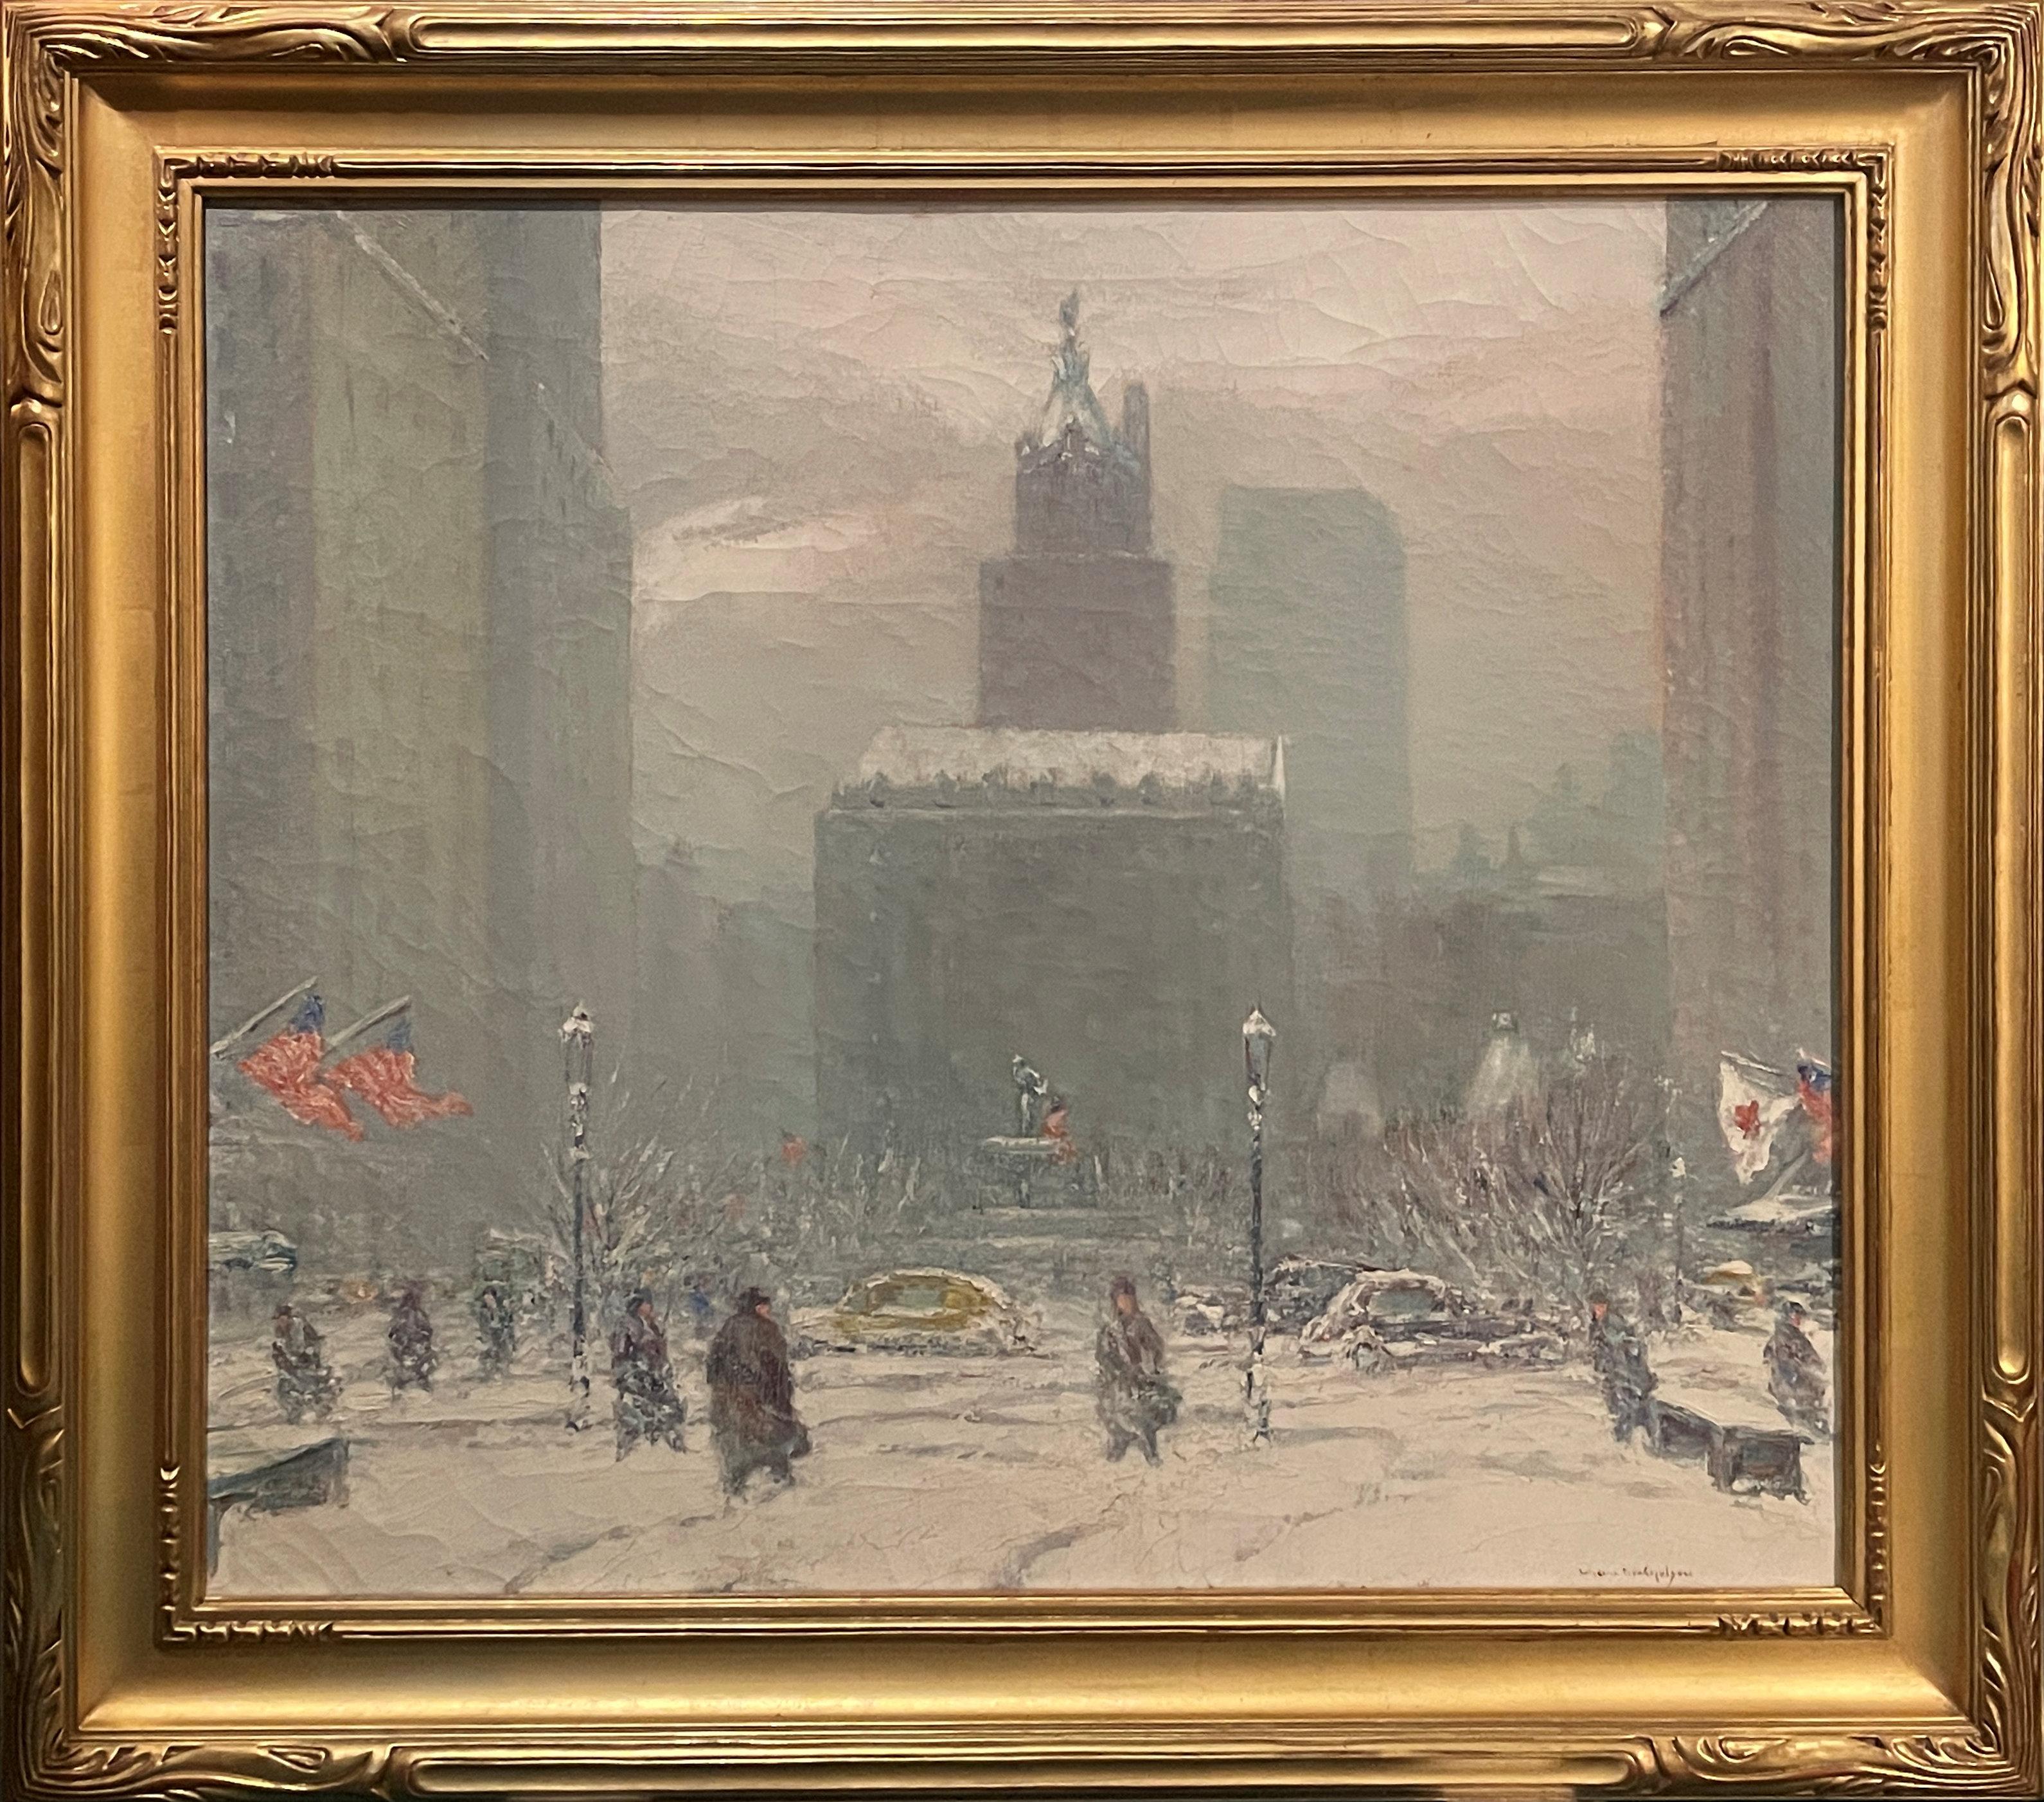 Johann Berthelsen
Plaza in Winter
Signed lower right
Oil on canvas
25 x 30 inches

He was born in Copenhagen in 1883, the 7th of seven sons, to Conrad and Dorothea Karen Berthelsen. The parents moved in artistic and professional circles.  In 1890,